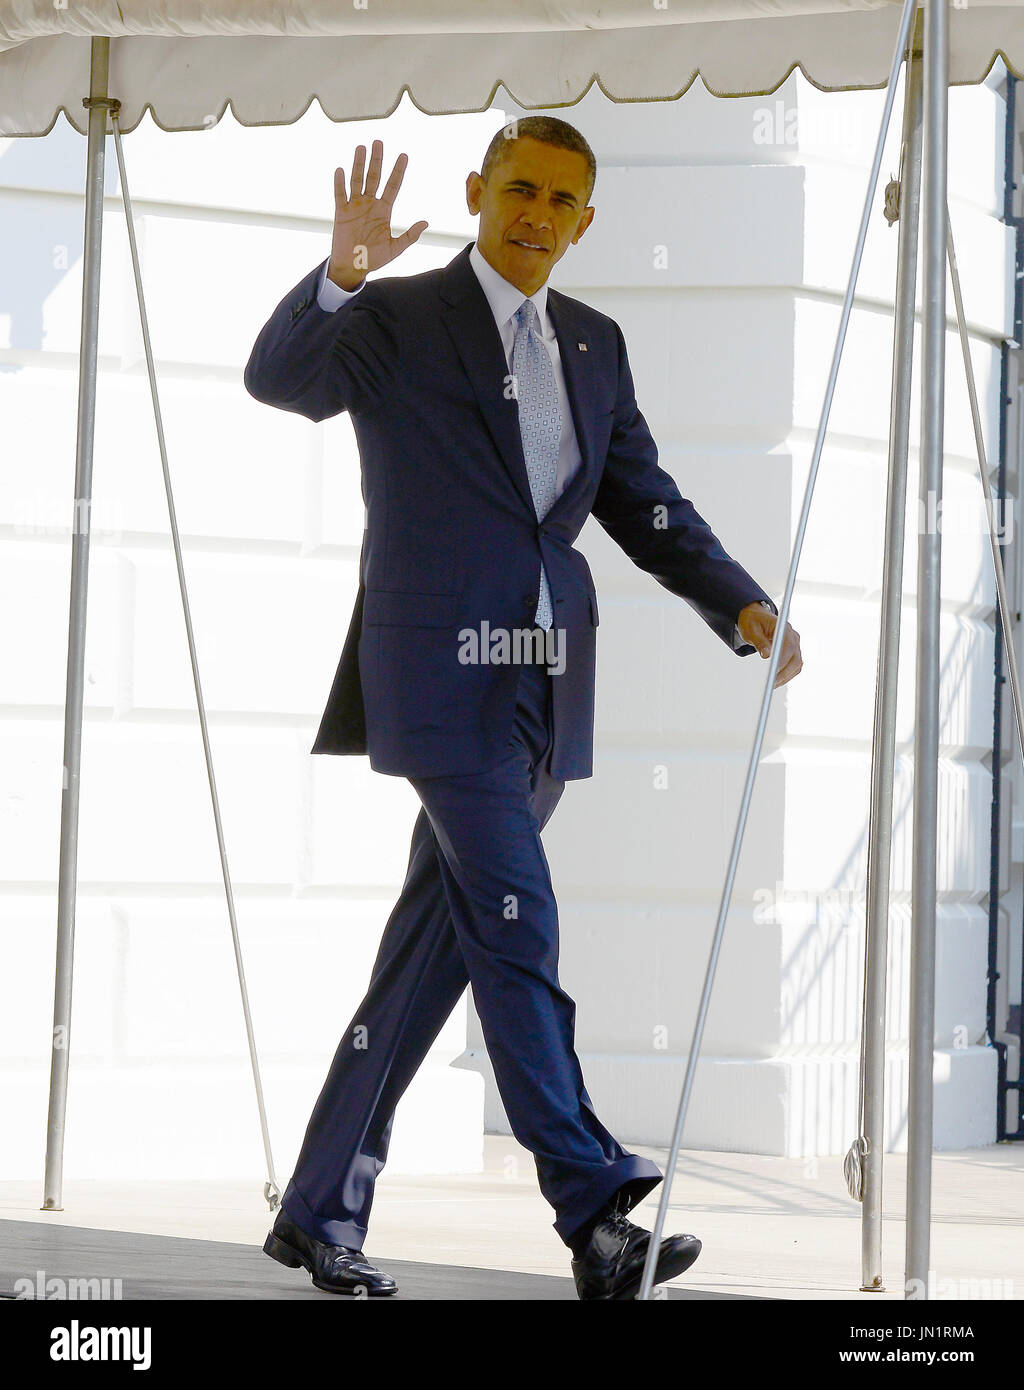 United States President Barack Obama waves to the photographers as he departs the White House in Washington, D.C. for Henderson, Nevada on Sunday, September 30, 2012..Credit: Ron Sachs / Pool via CNP Stock Photo